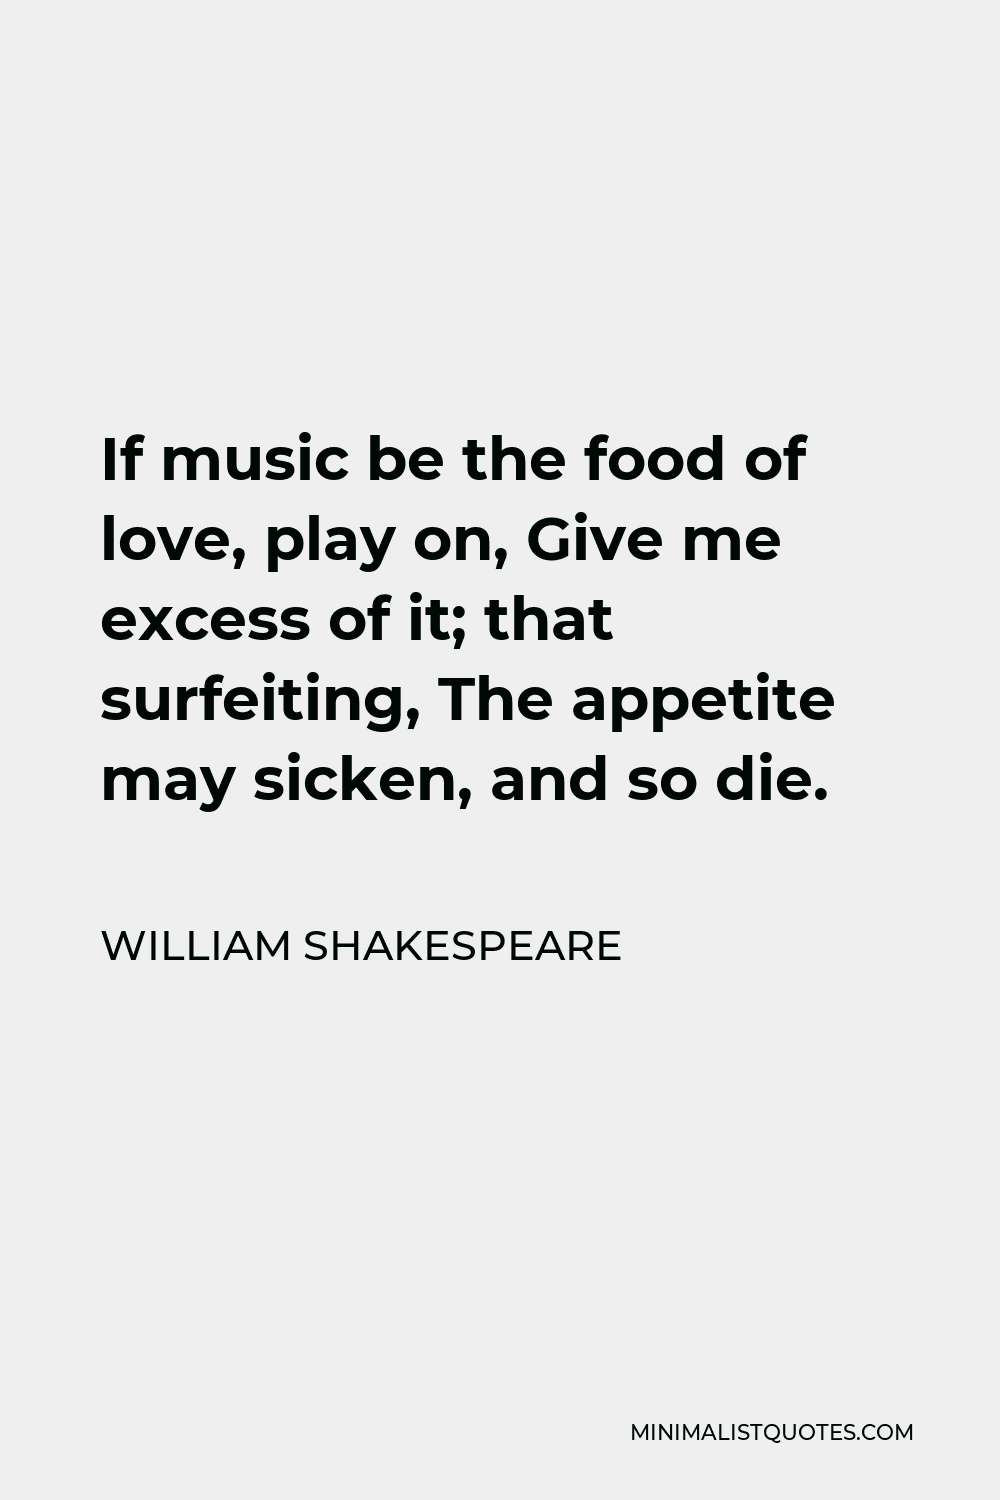 William Shakespeare Quote - If music be the food of love, play on, Give me excess of it; that surfeiting, The appetite may sicken, and so die.